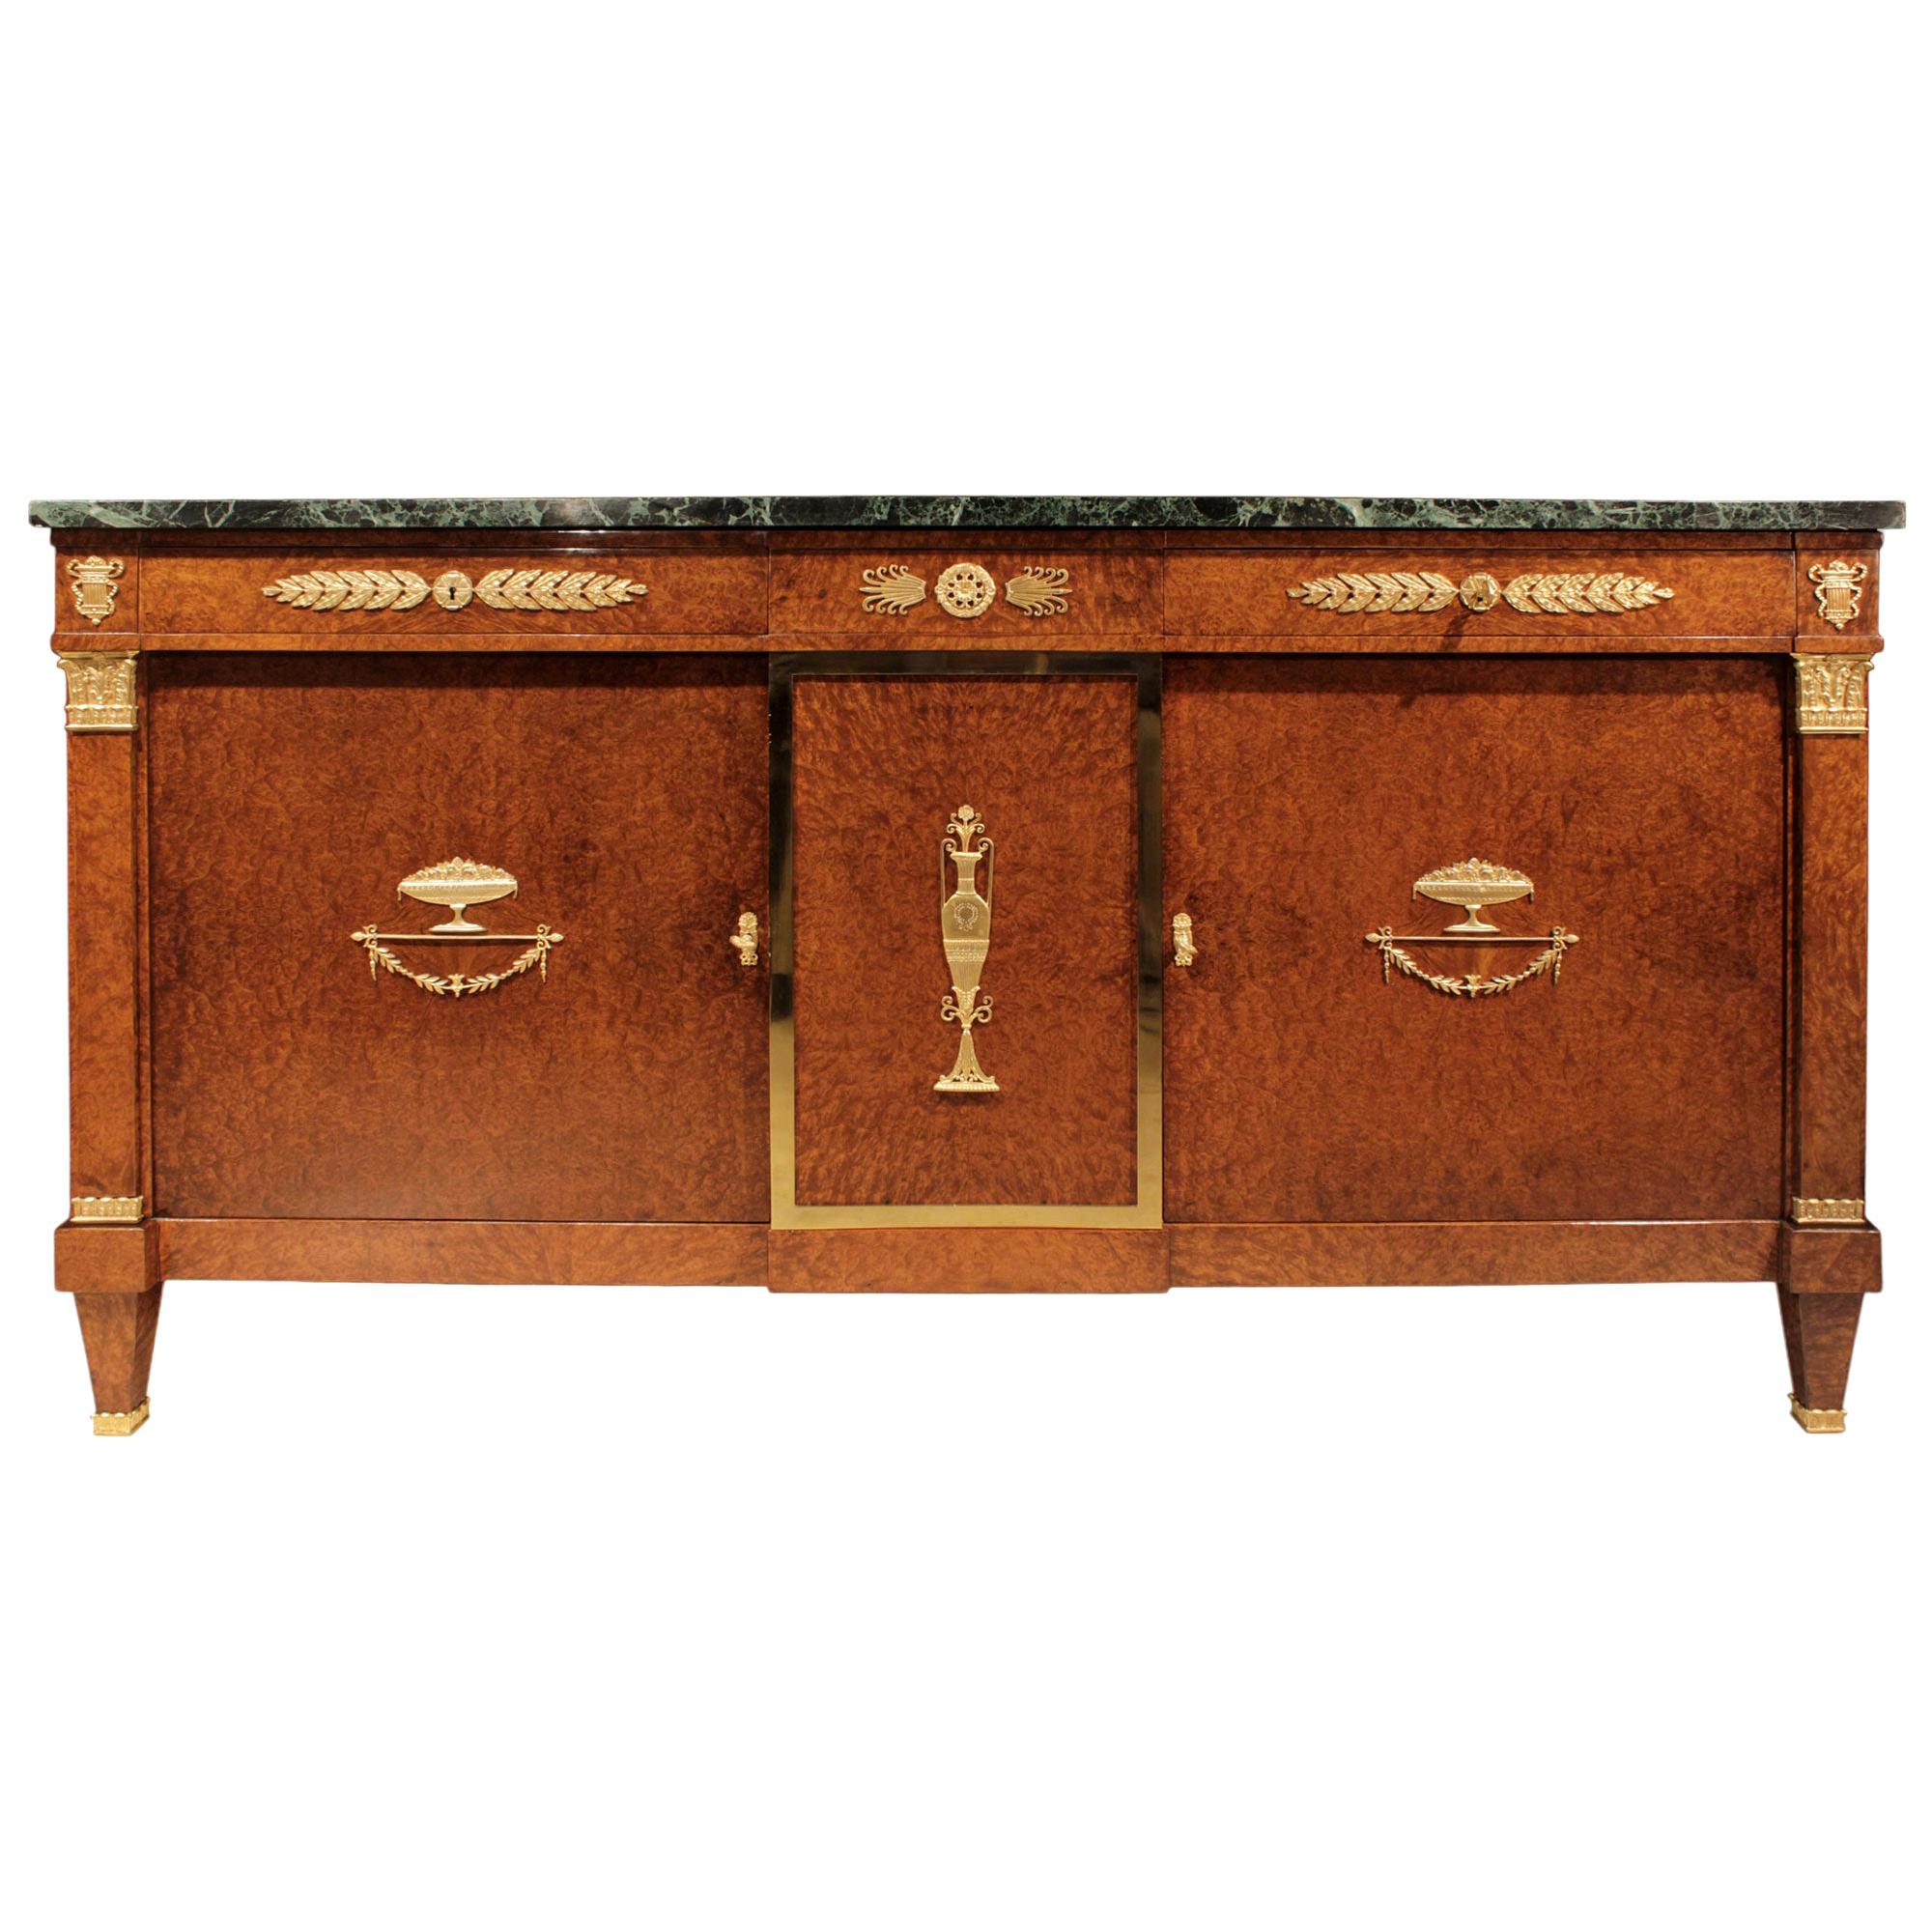 French 19th Century Neoclassical Style Burl Walnut and Ormolu Mounted Buffet